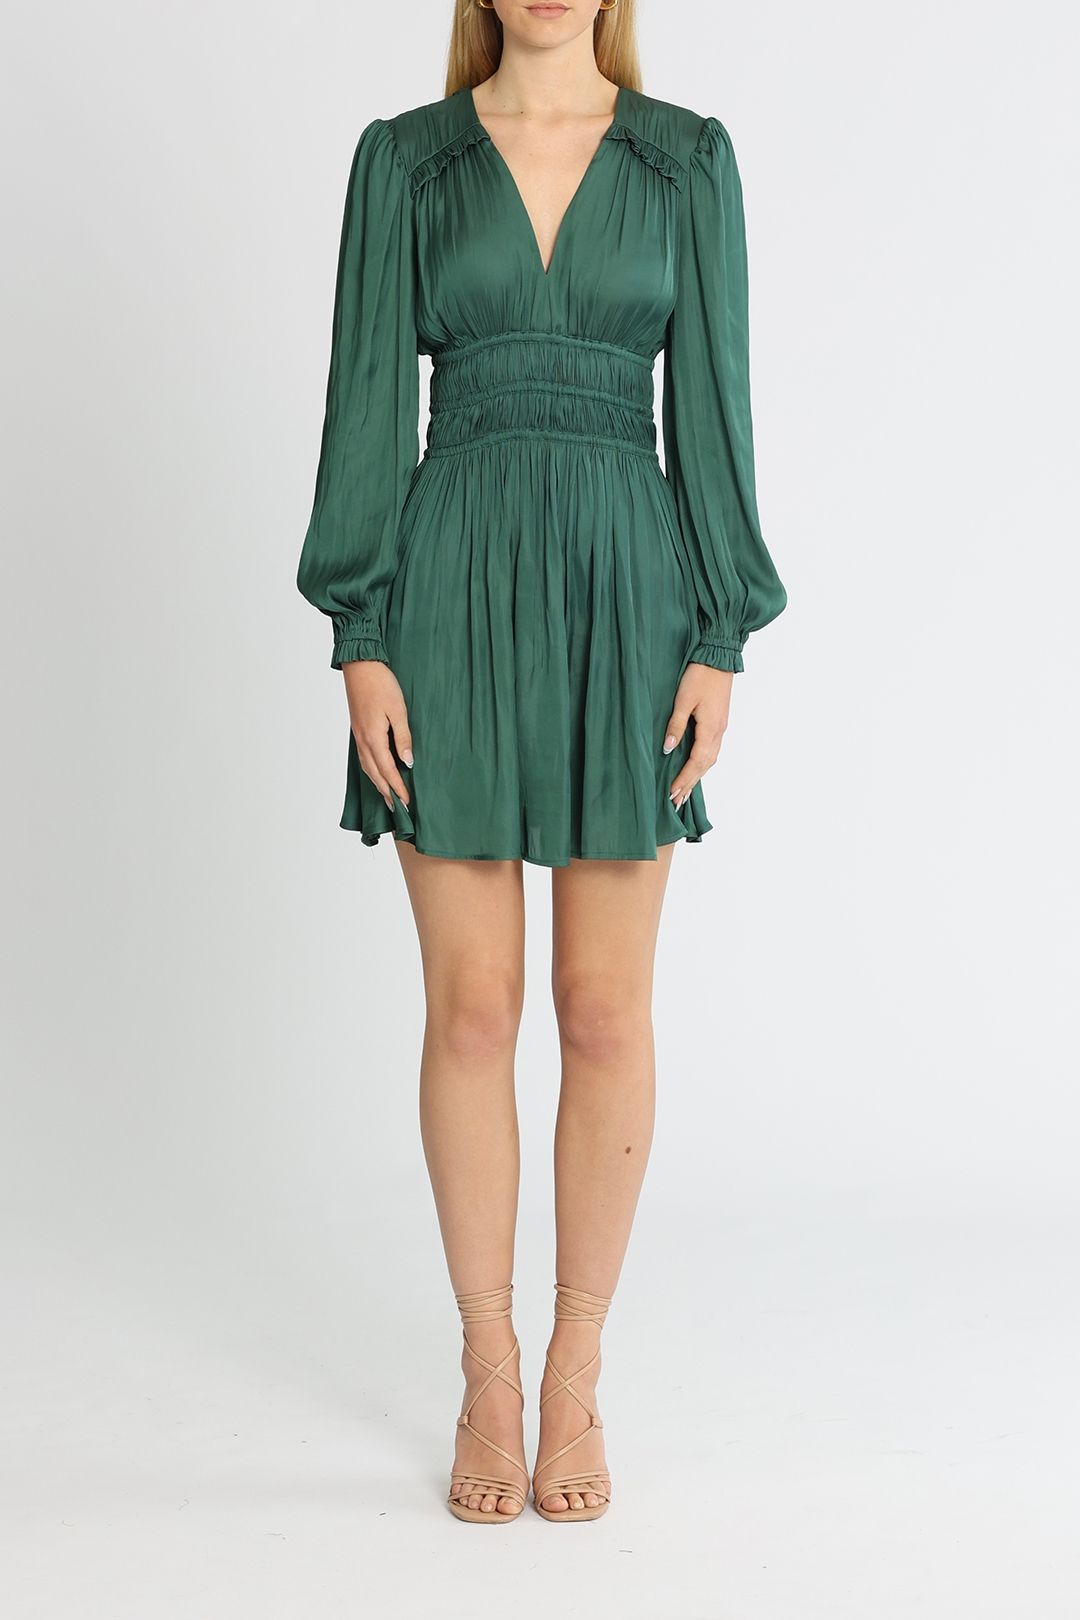 Belle and Bloom Shine Bright Ruched Mini Dress Green